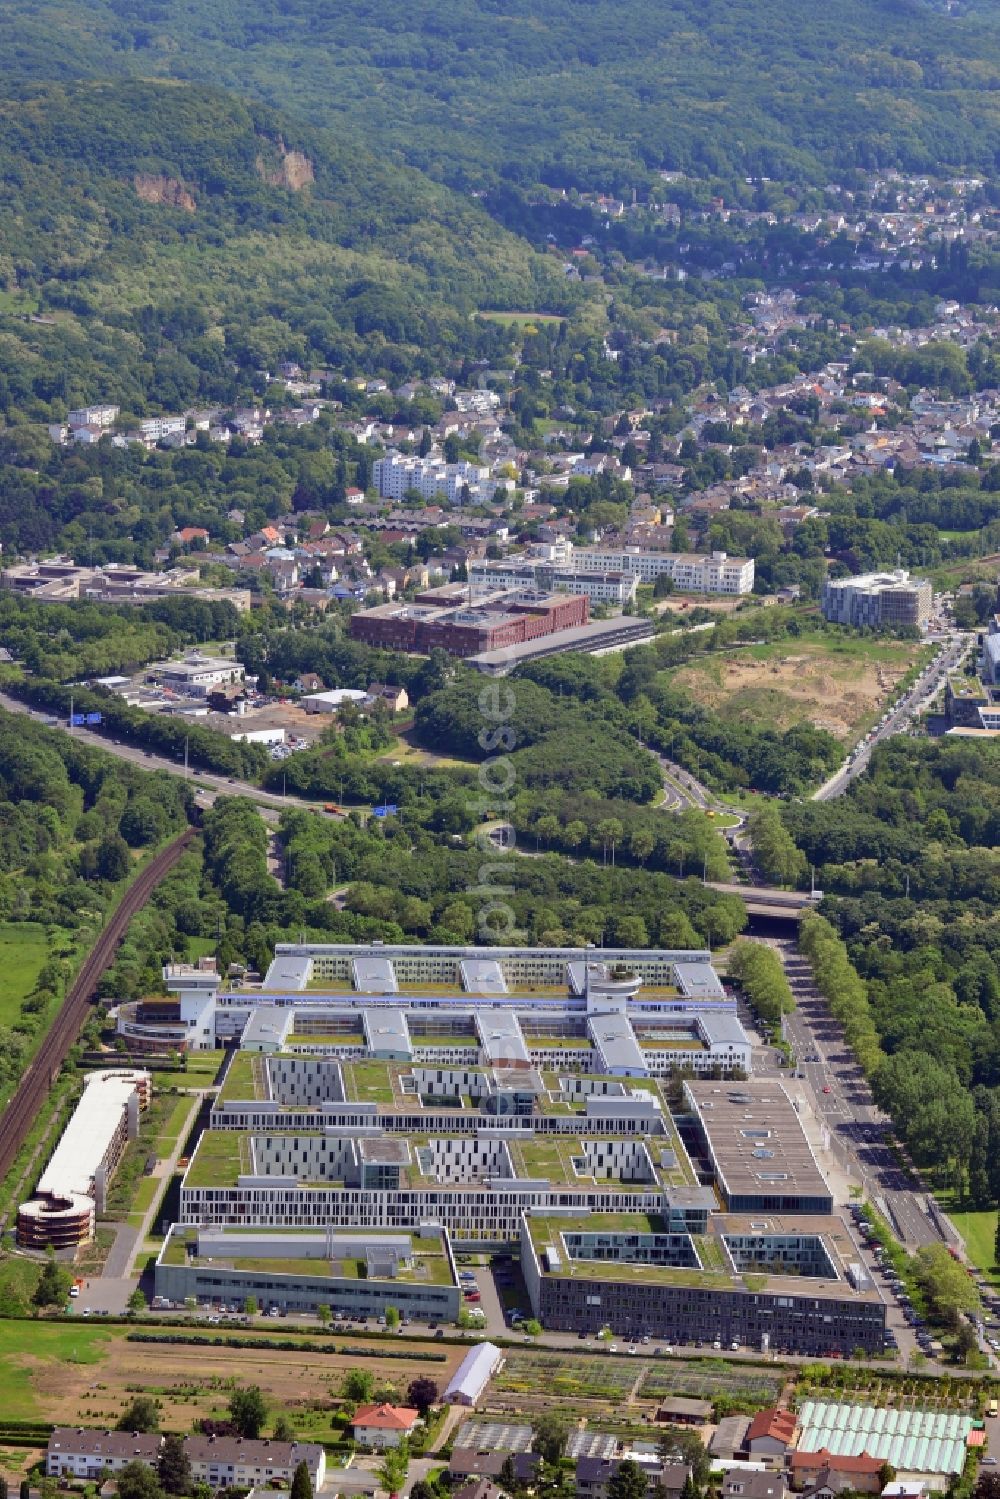 Aerial photograph Bonn - The headquarters of T-Mobile Germany in the Beuel part of the city of Bonn in the state of North Rhine-Westphalia. T-Mobile is part of Telekom Germany and the biggest and one of the most important mobile phone service providers in Germany. View of the company compound from the West